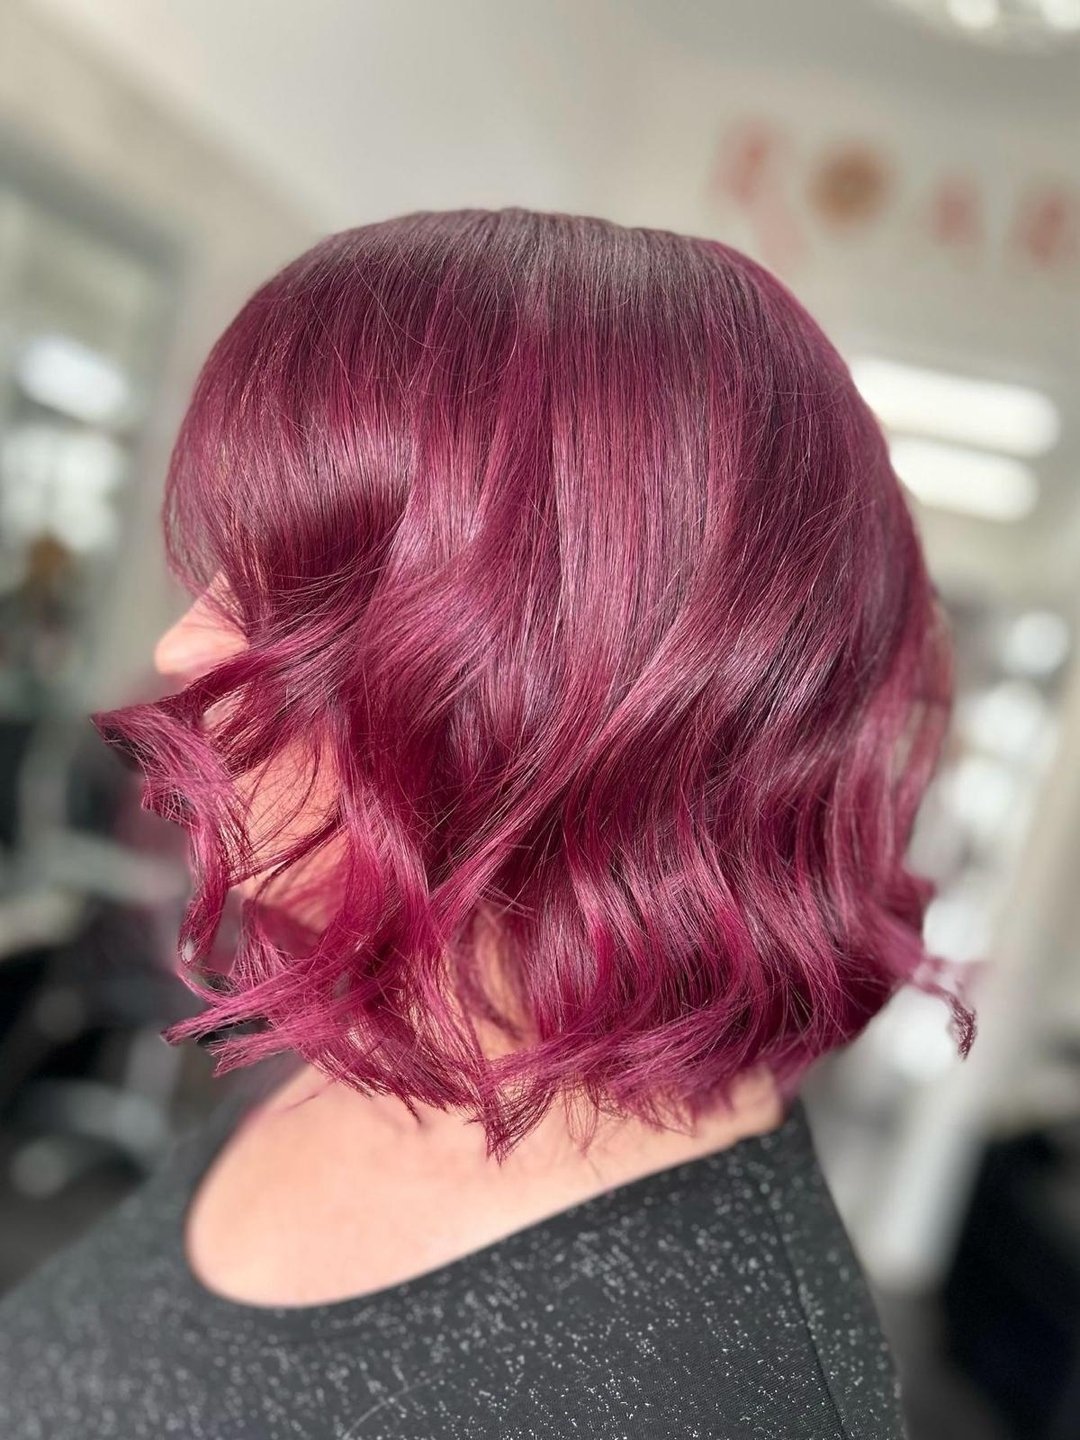 Redefining bold with a touch of ruby magic! ❤️ 

Our client's short, ruby red hair is a striking statement that speaks volumes. Ready to make a daring transformation? Click the link in our bio and let's infuse some red-hot energy into your style! 🔥 